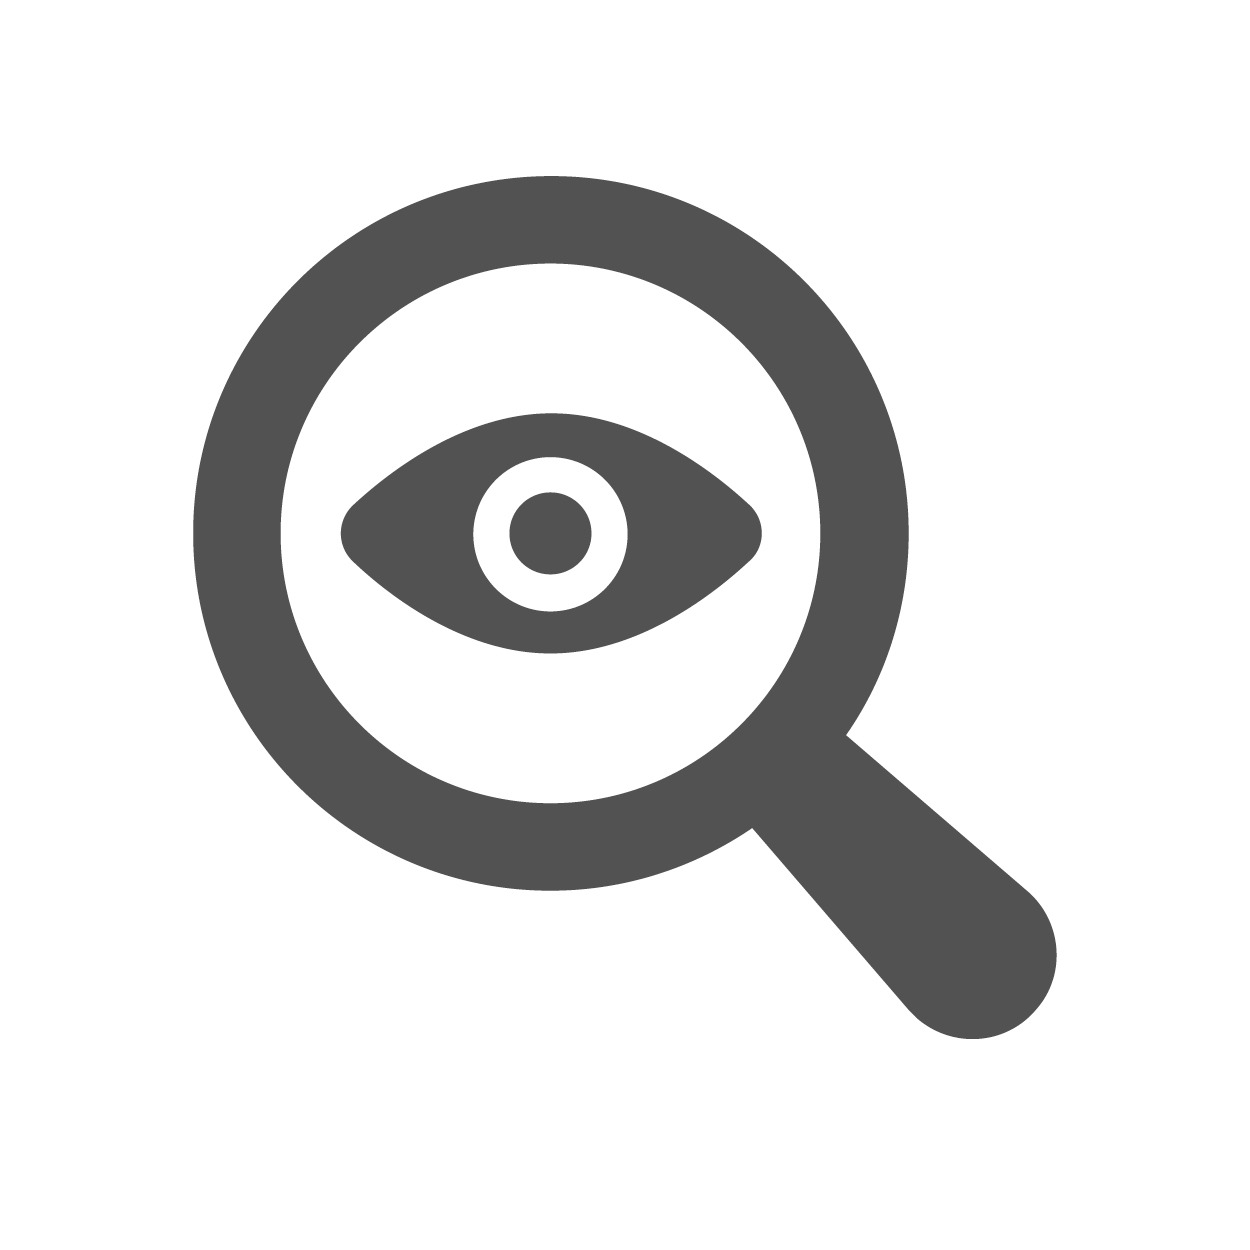 Graphic of eye in magnifying glass, created by Adrien Coquet from the Noun Project